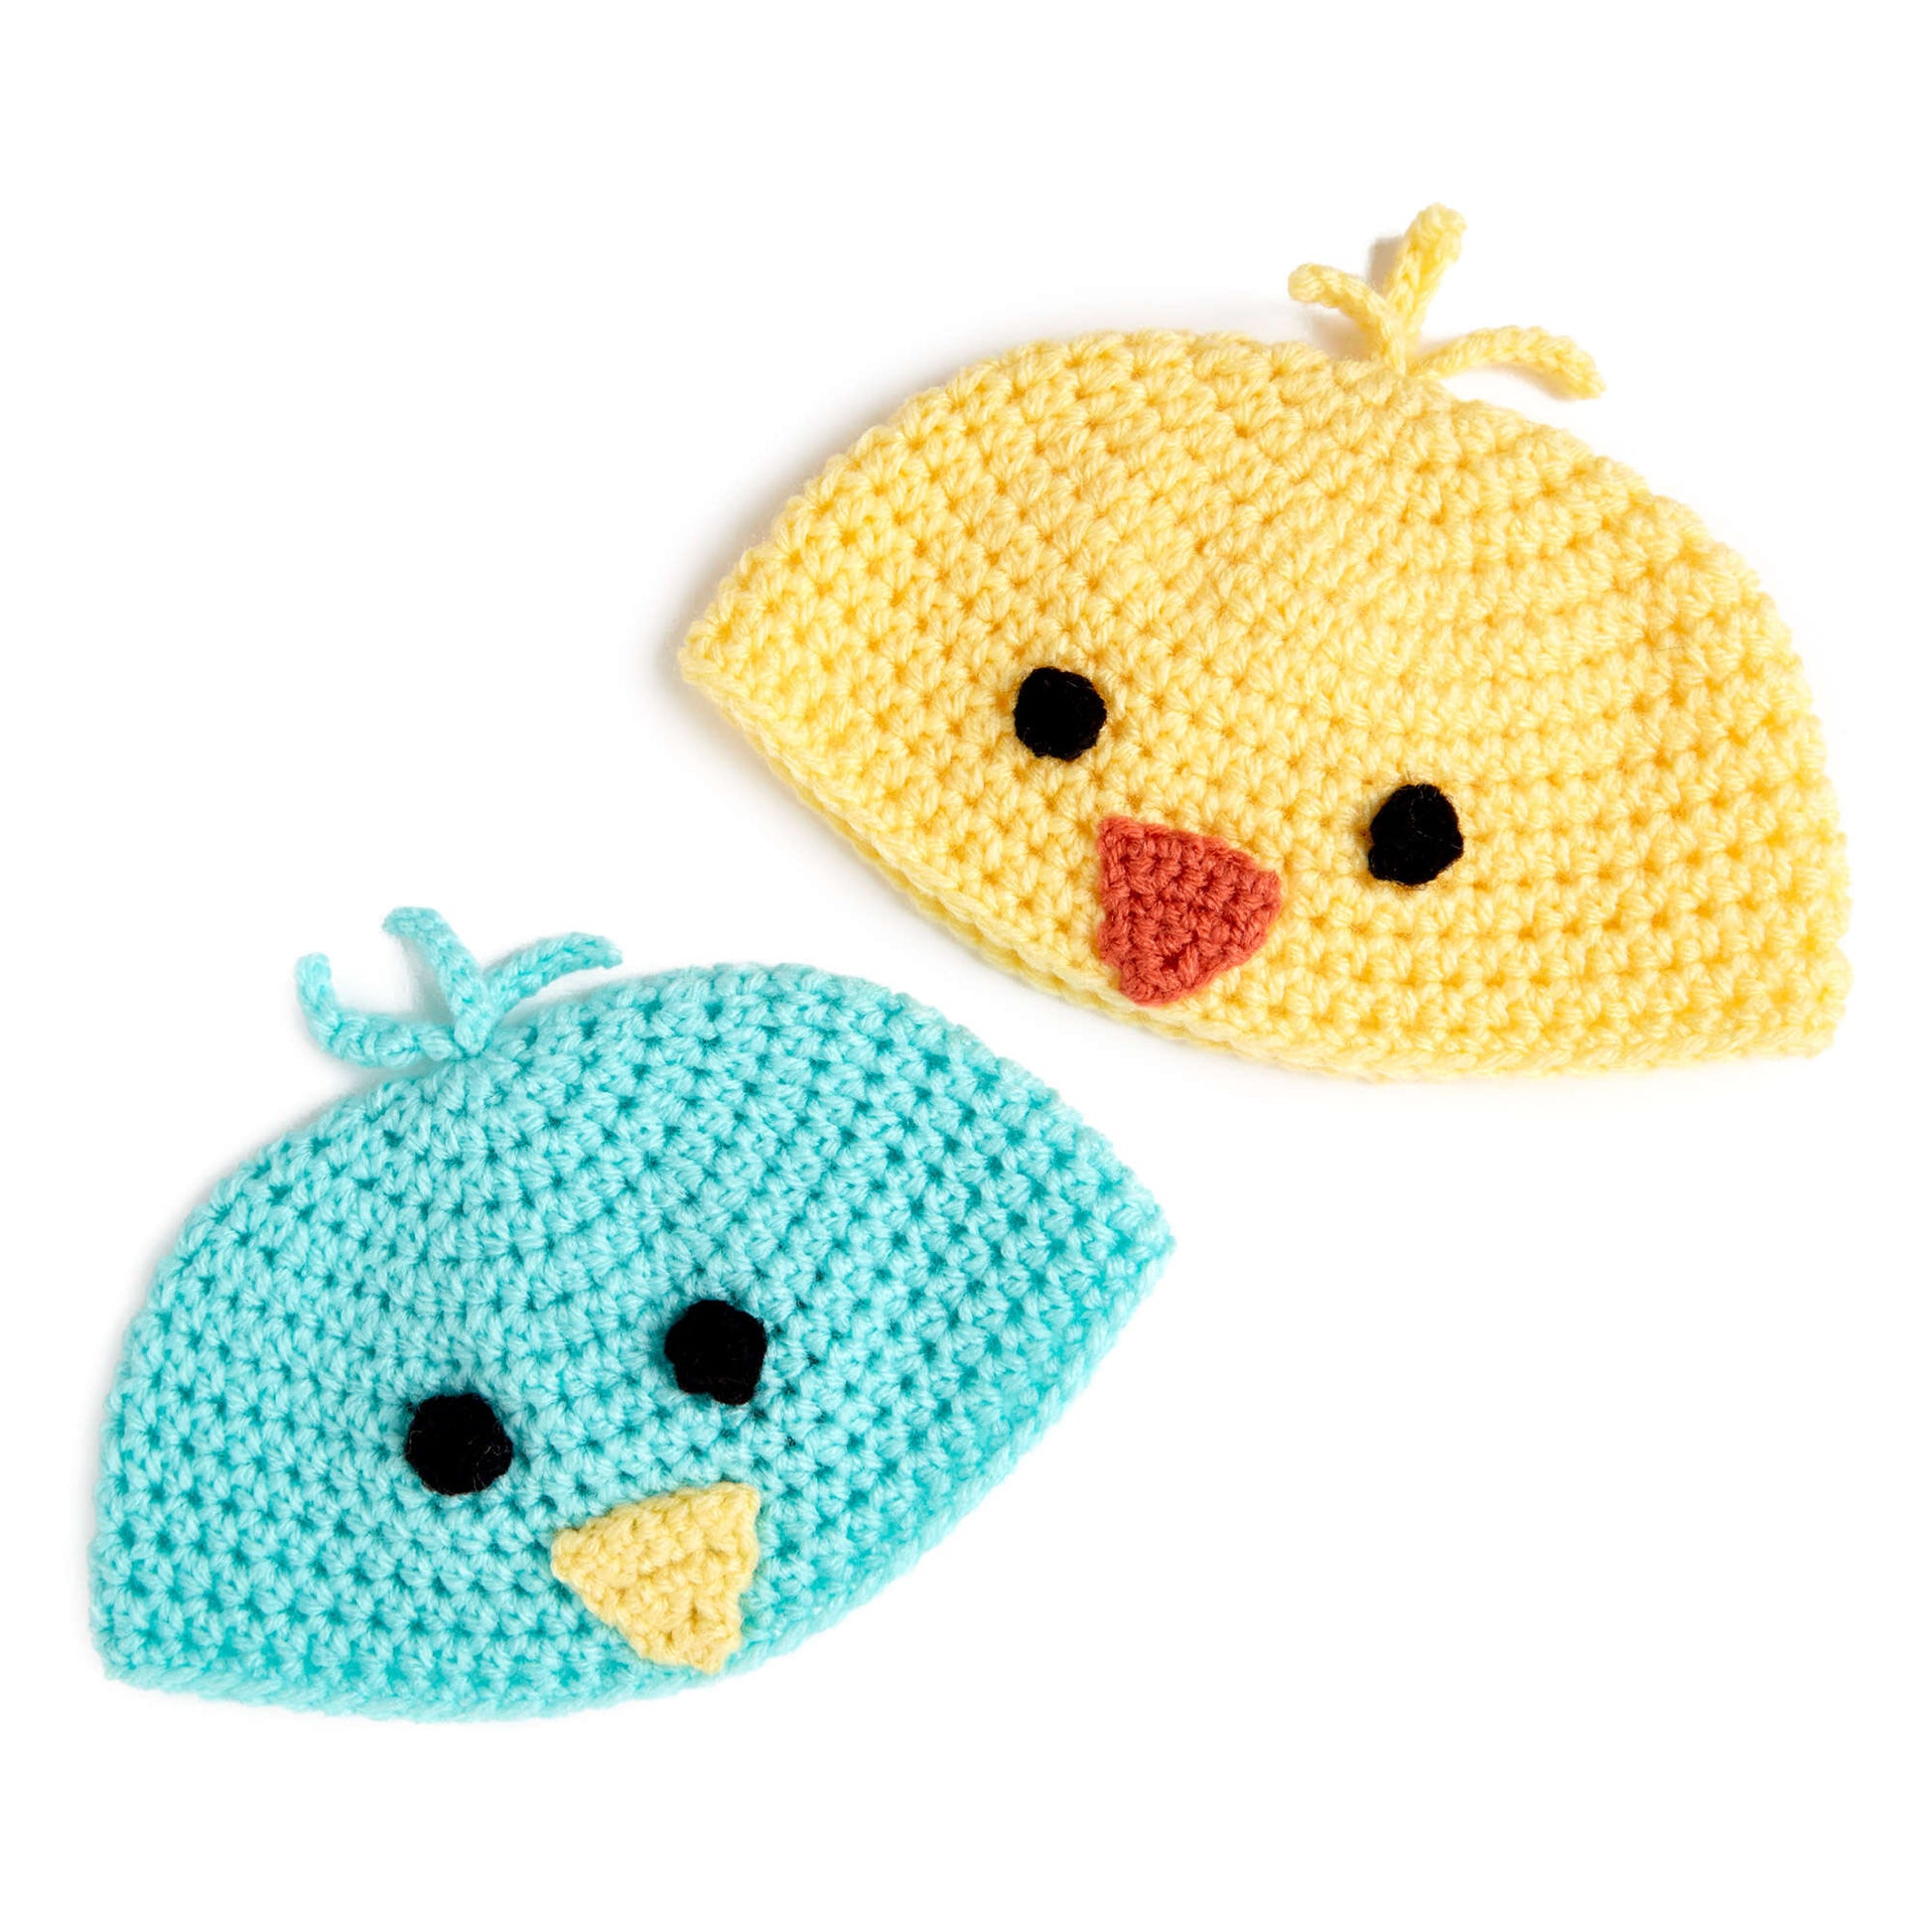 Free Red Heart Crochet Baby Chick Hats Pattern